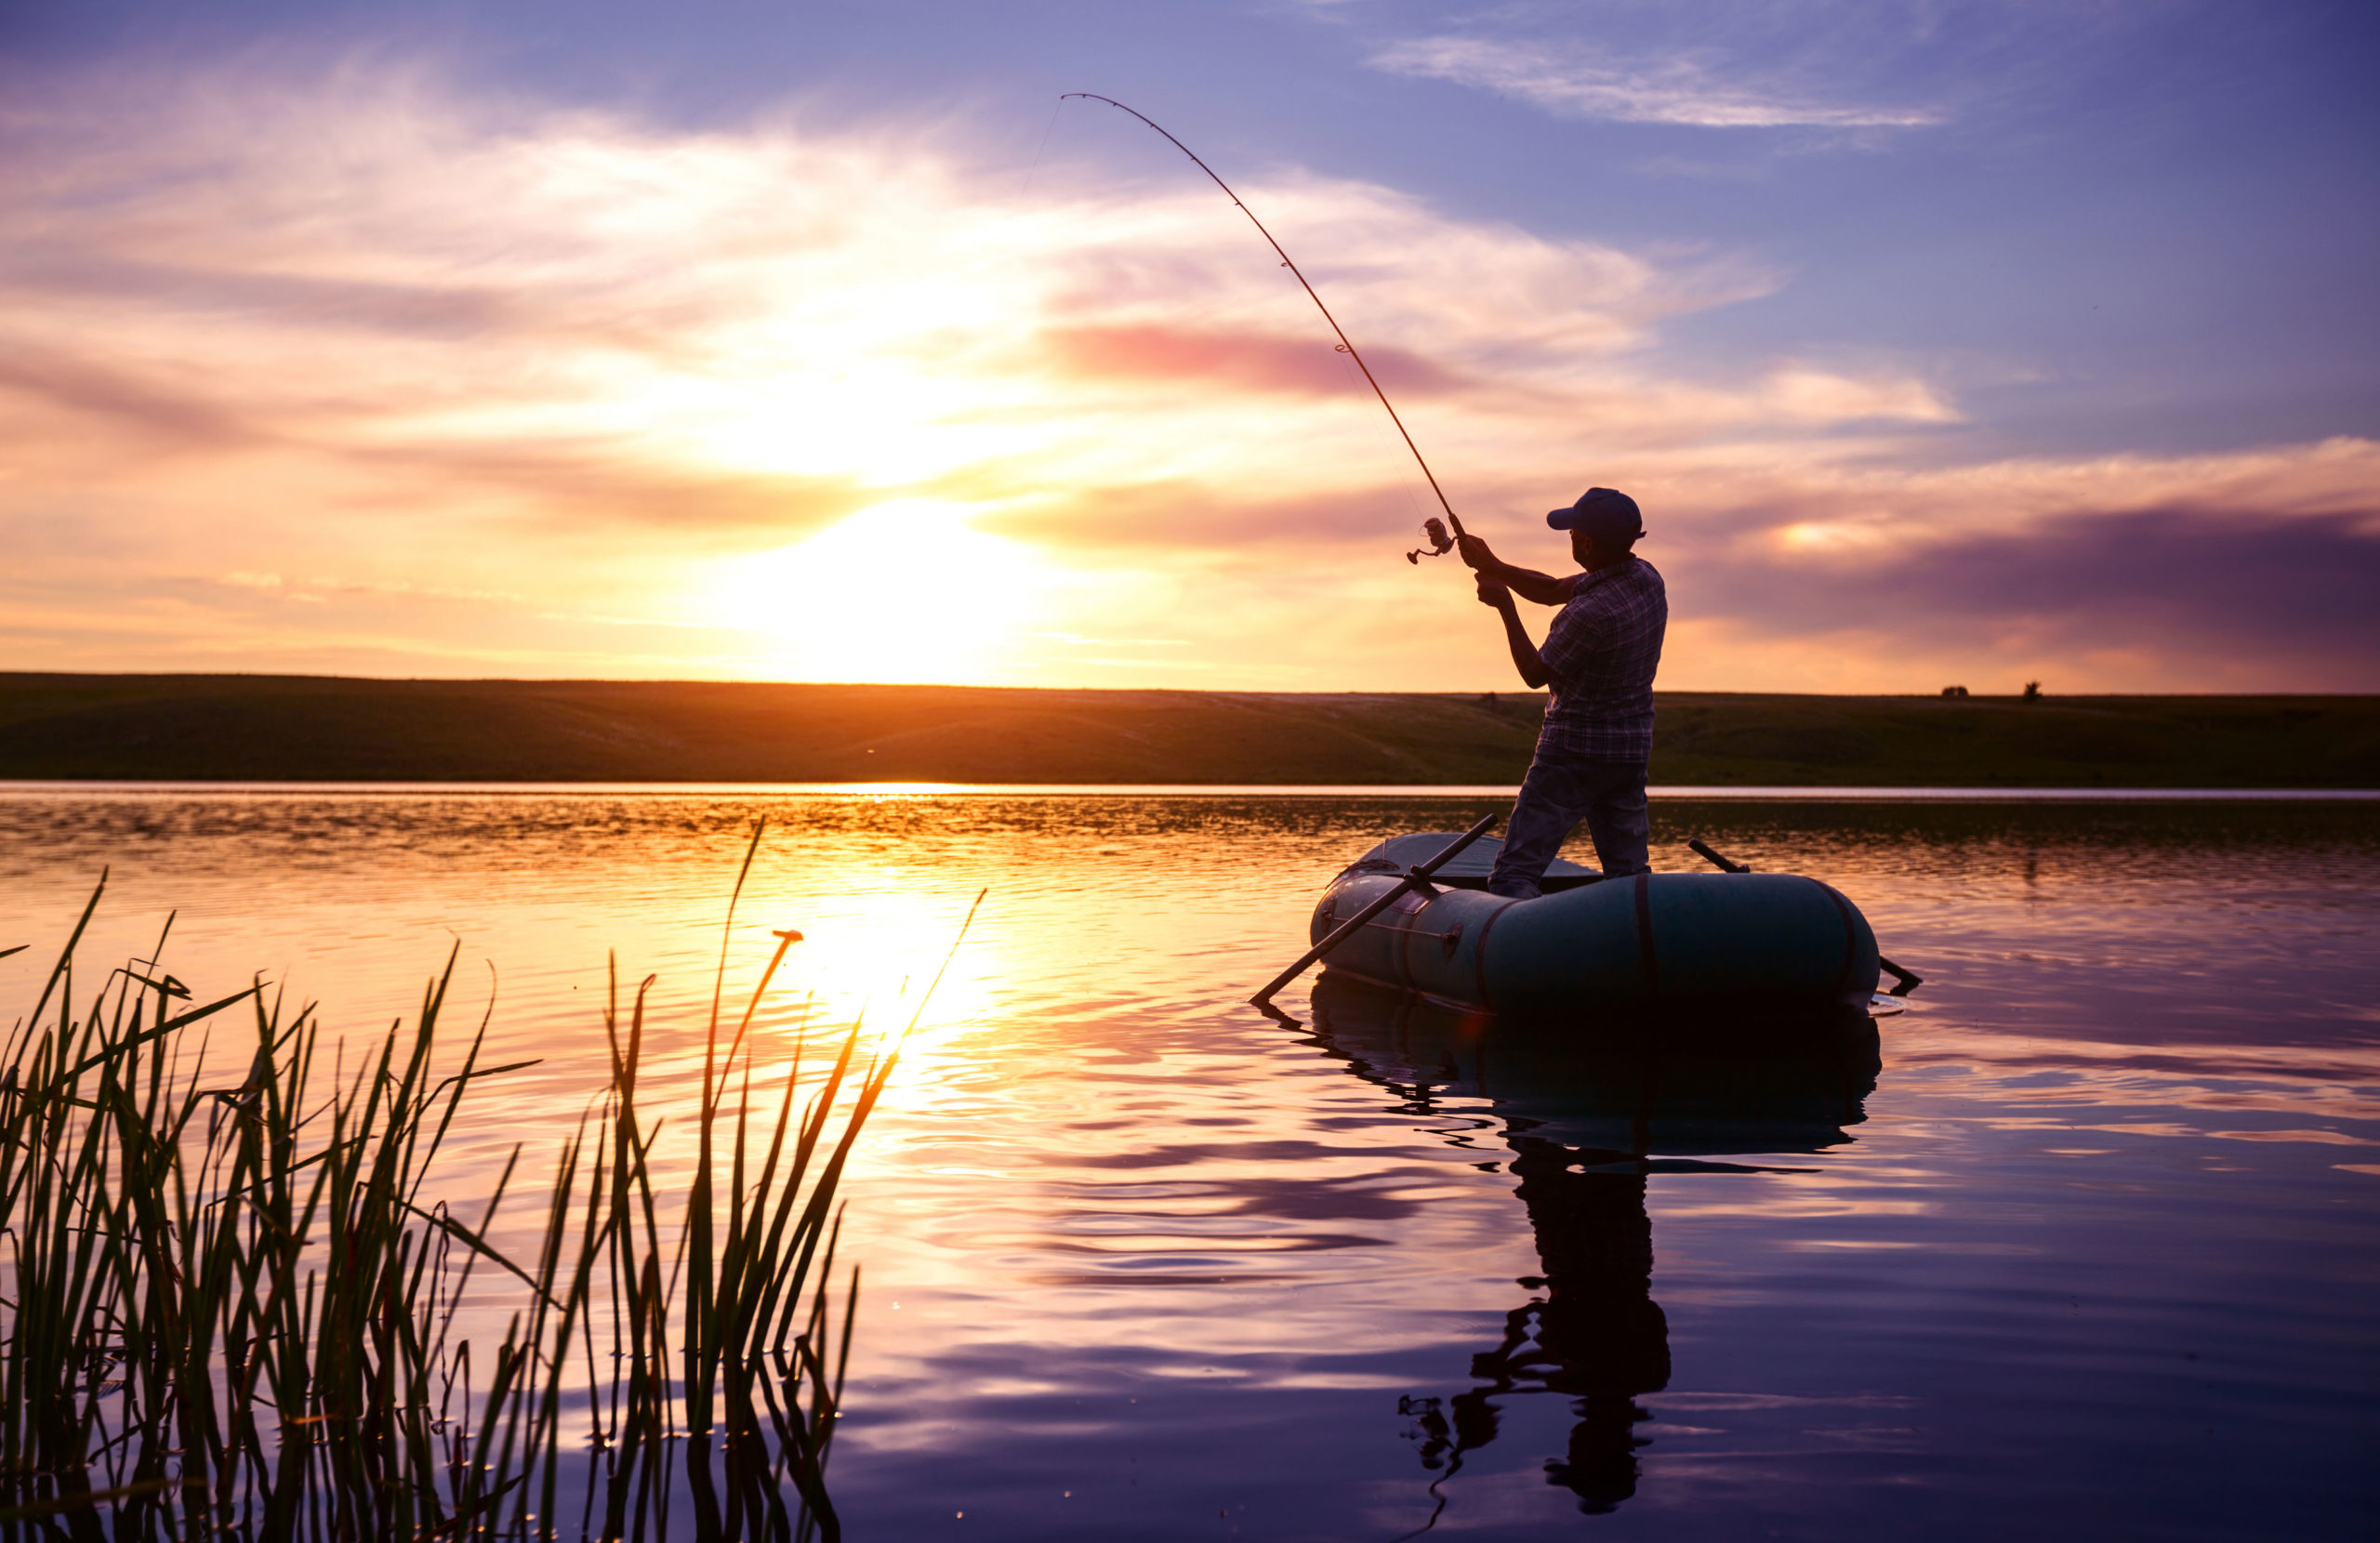 Texas hunting, fishing licenses on sale today, Aug. 15 – Blue